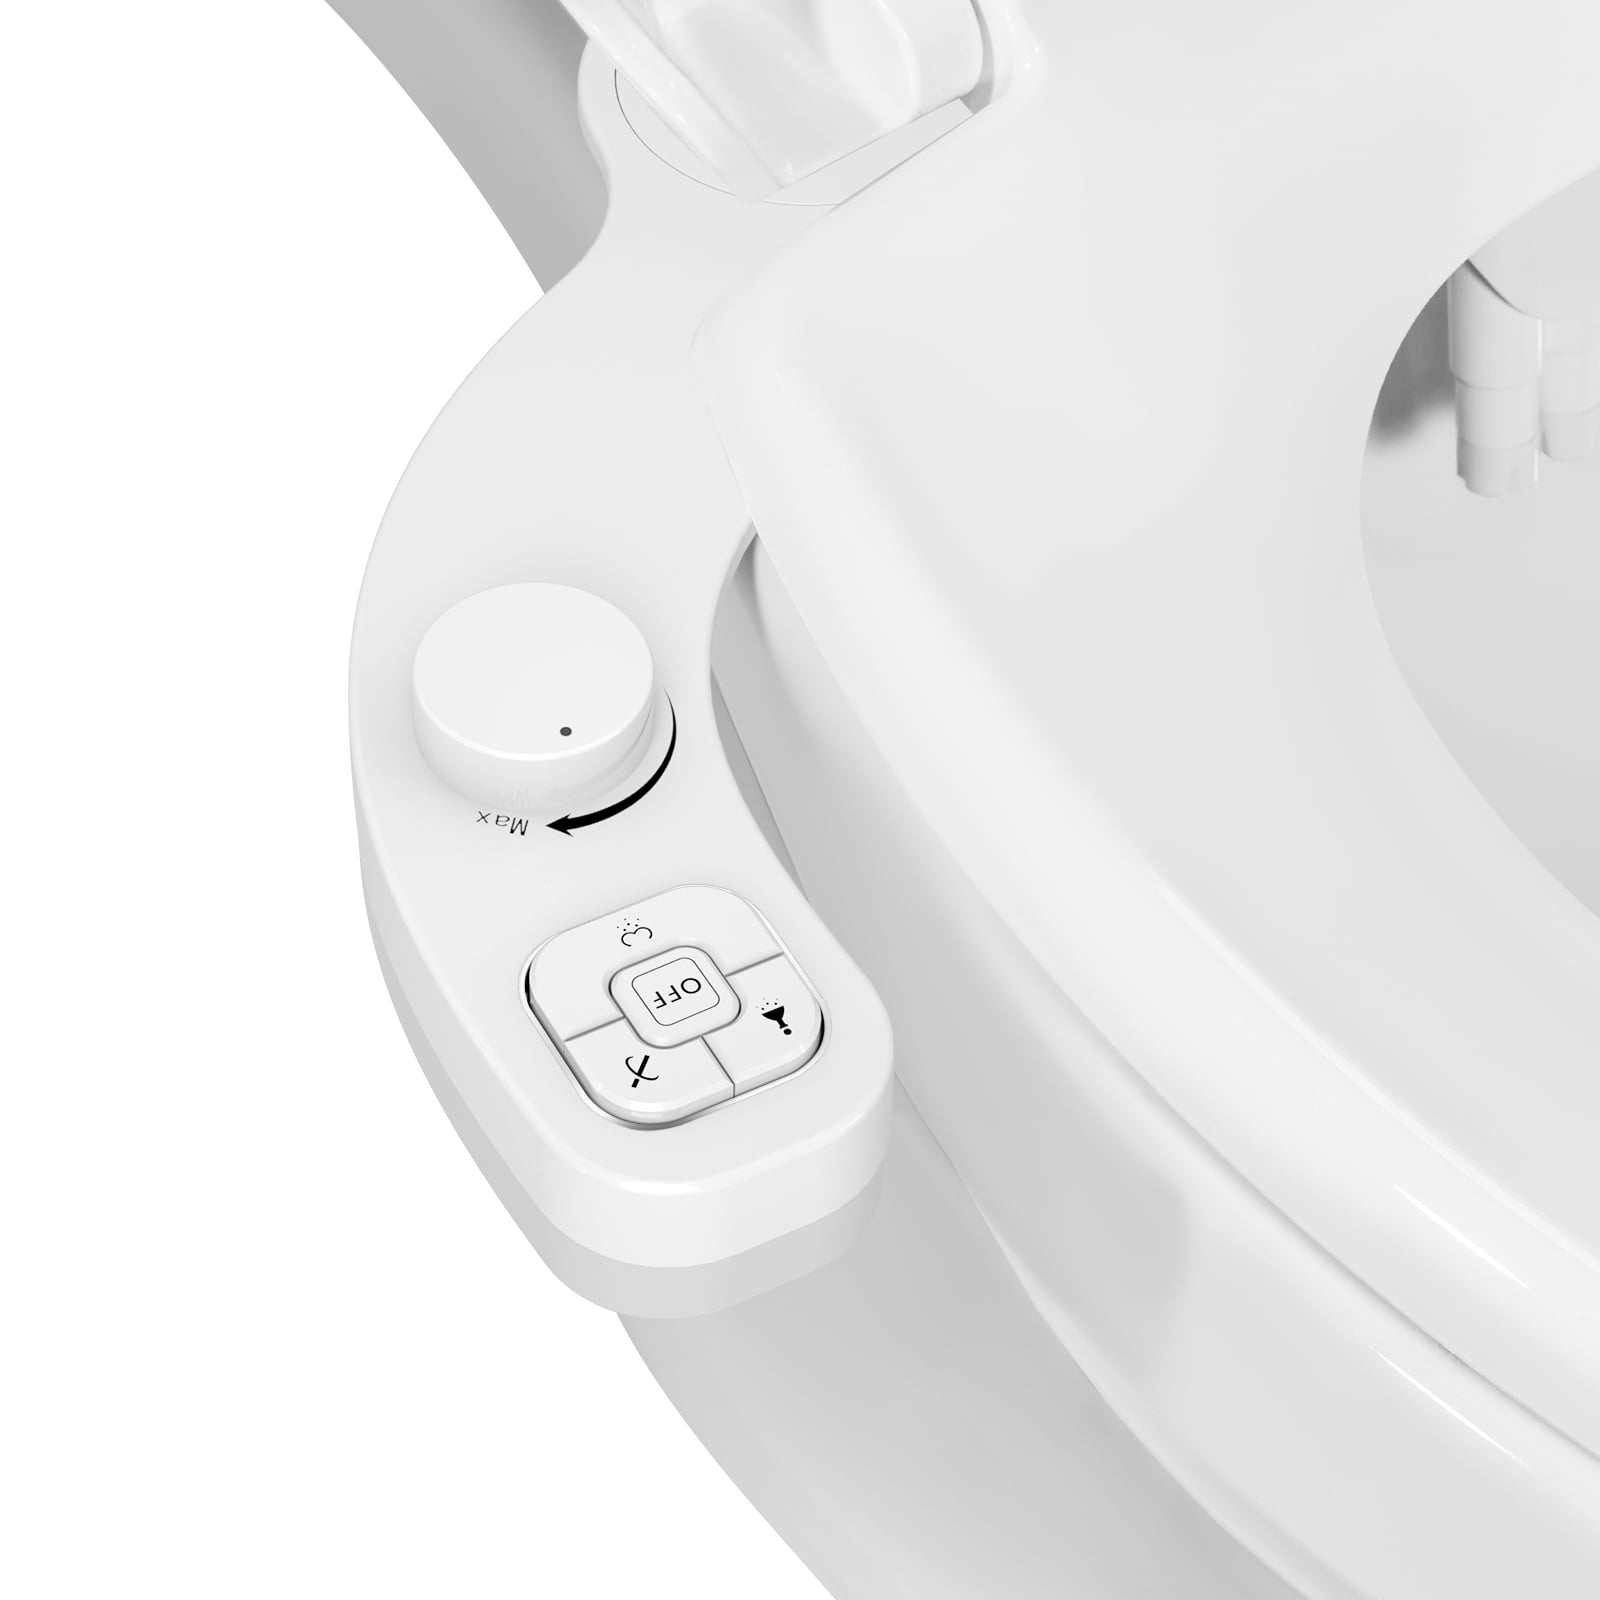 SAMODRA Non-Electric Bidet - Self Cleaning Dual Nozzle (Frontal and Rear  Wash) Fresh Water Bidet Toilet Seat Attachment with Independent Adjustable  Water Pressure (Classic Silver) 